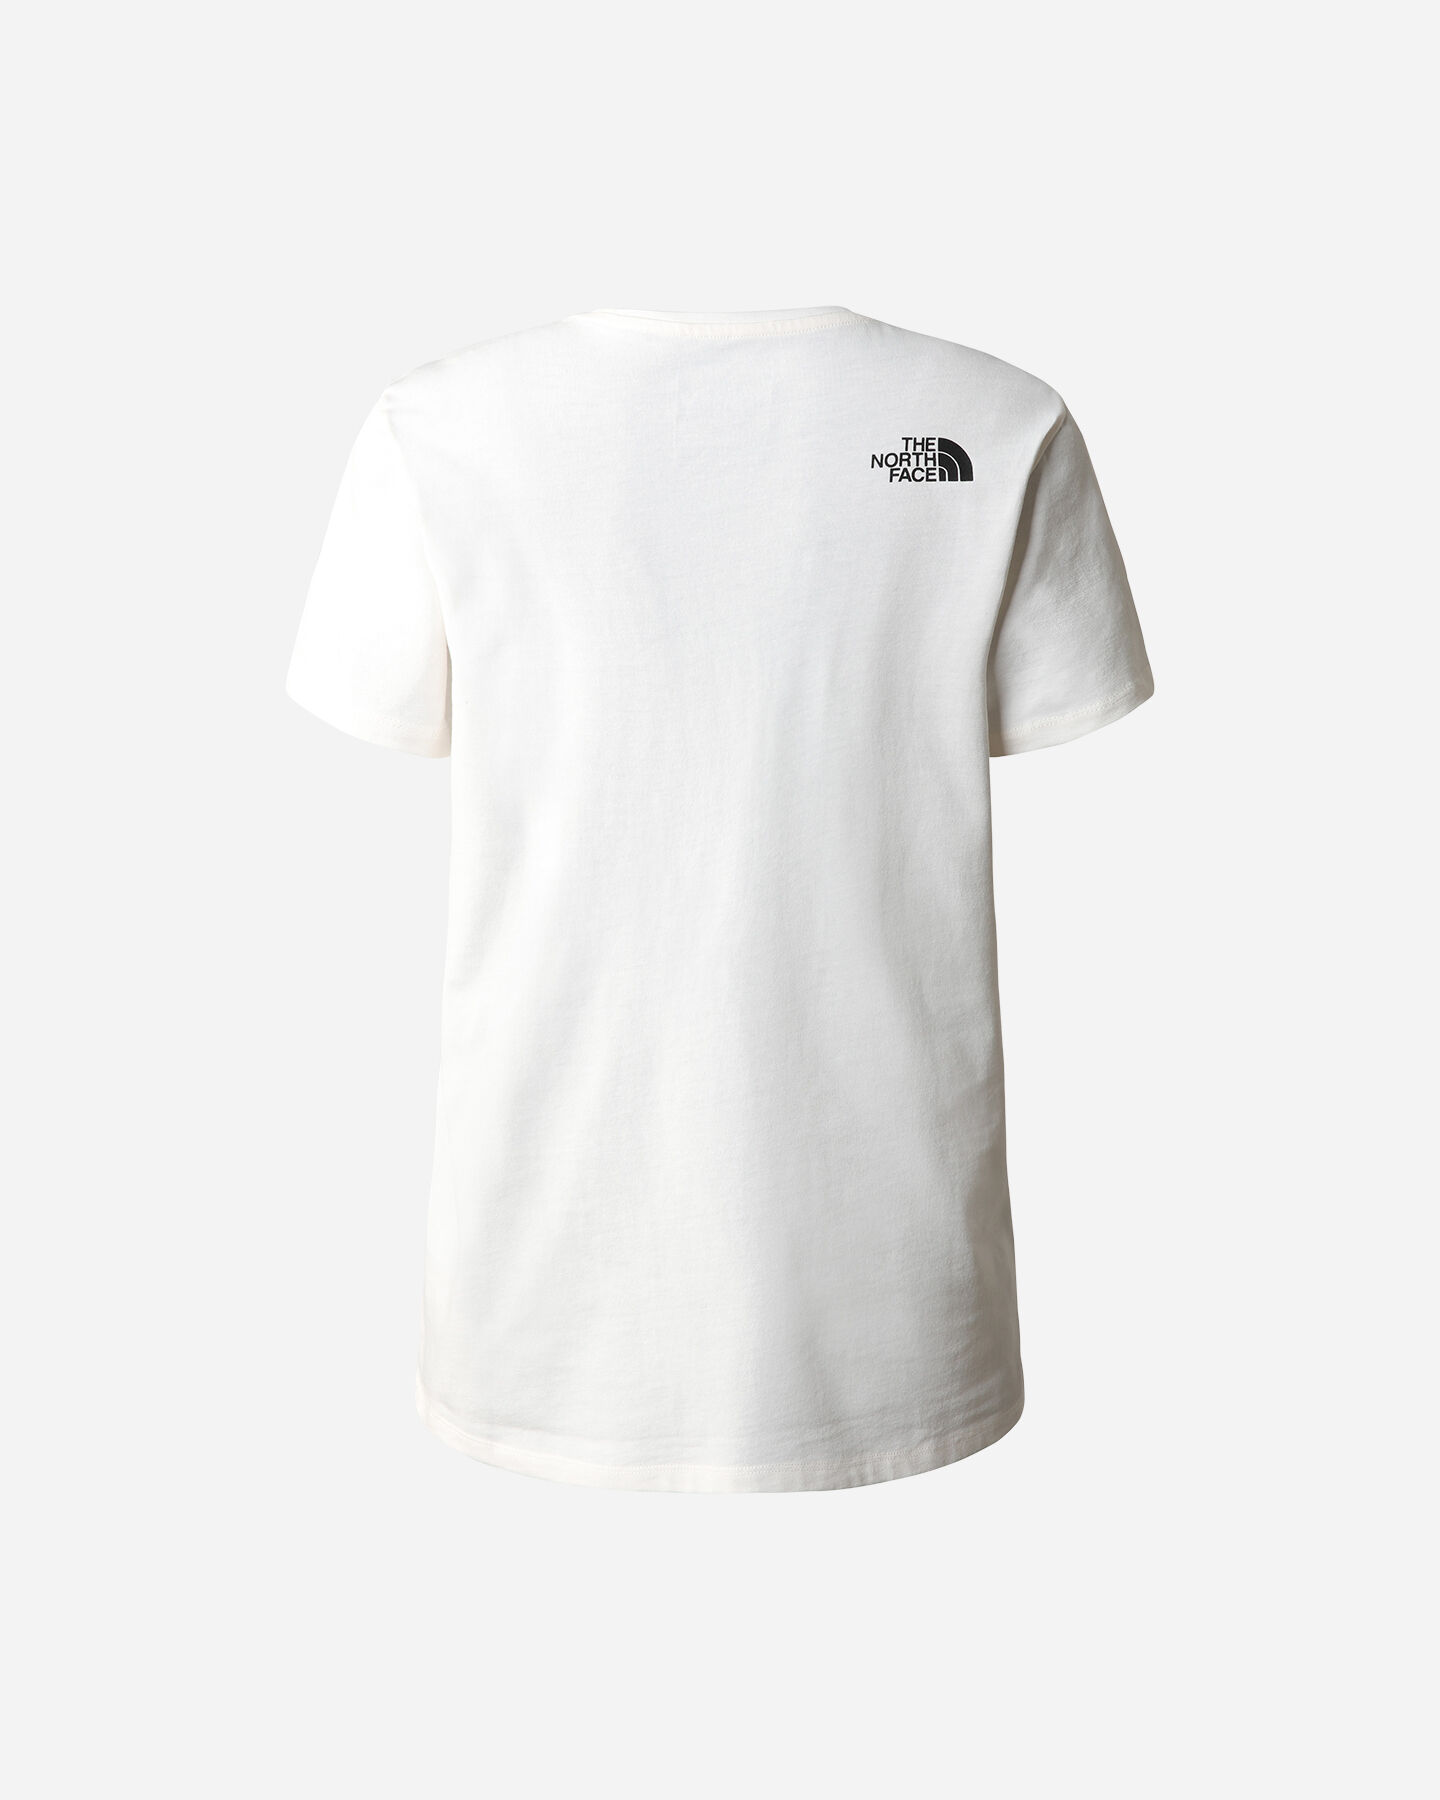  T-Shirt THE NORTH FACE FOUNDATION W S5536009 scatto 1